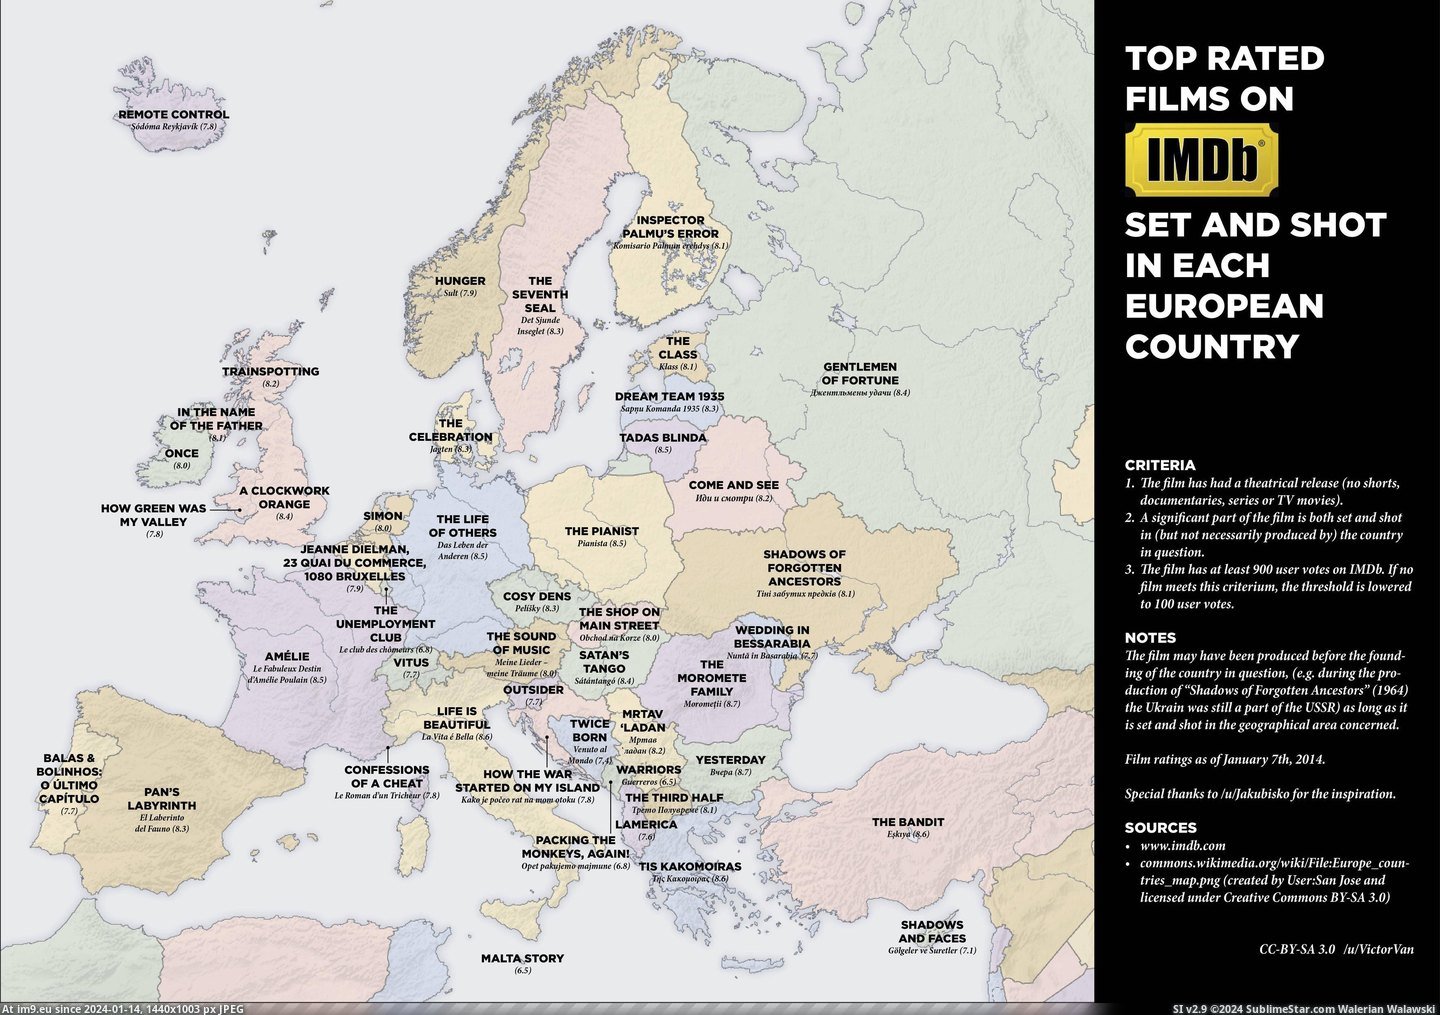 #Shot #Top #Films #Rated #Imdb #European #Country [Mapporn] Top rated films on IMDb set and shot in each European country [7087x4961] [OC] Pic. (Bild von album My r/MAPS favs))